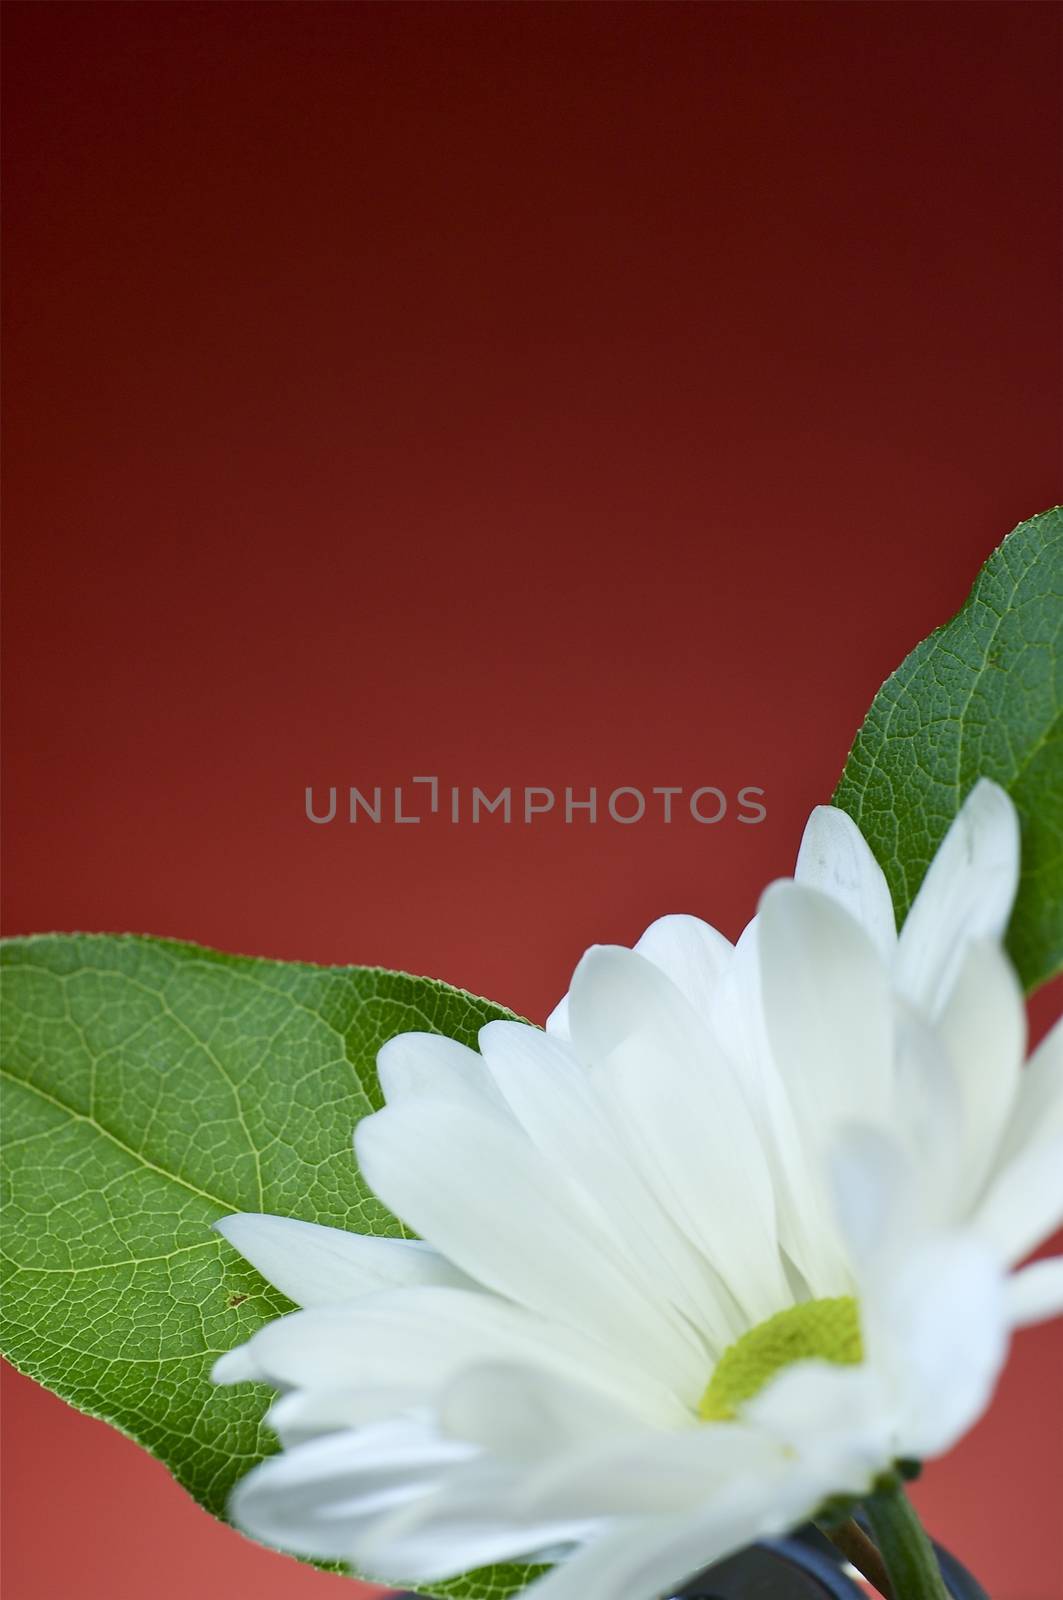 Flower with Green Leafs. Burgundy Background